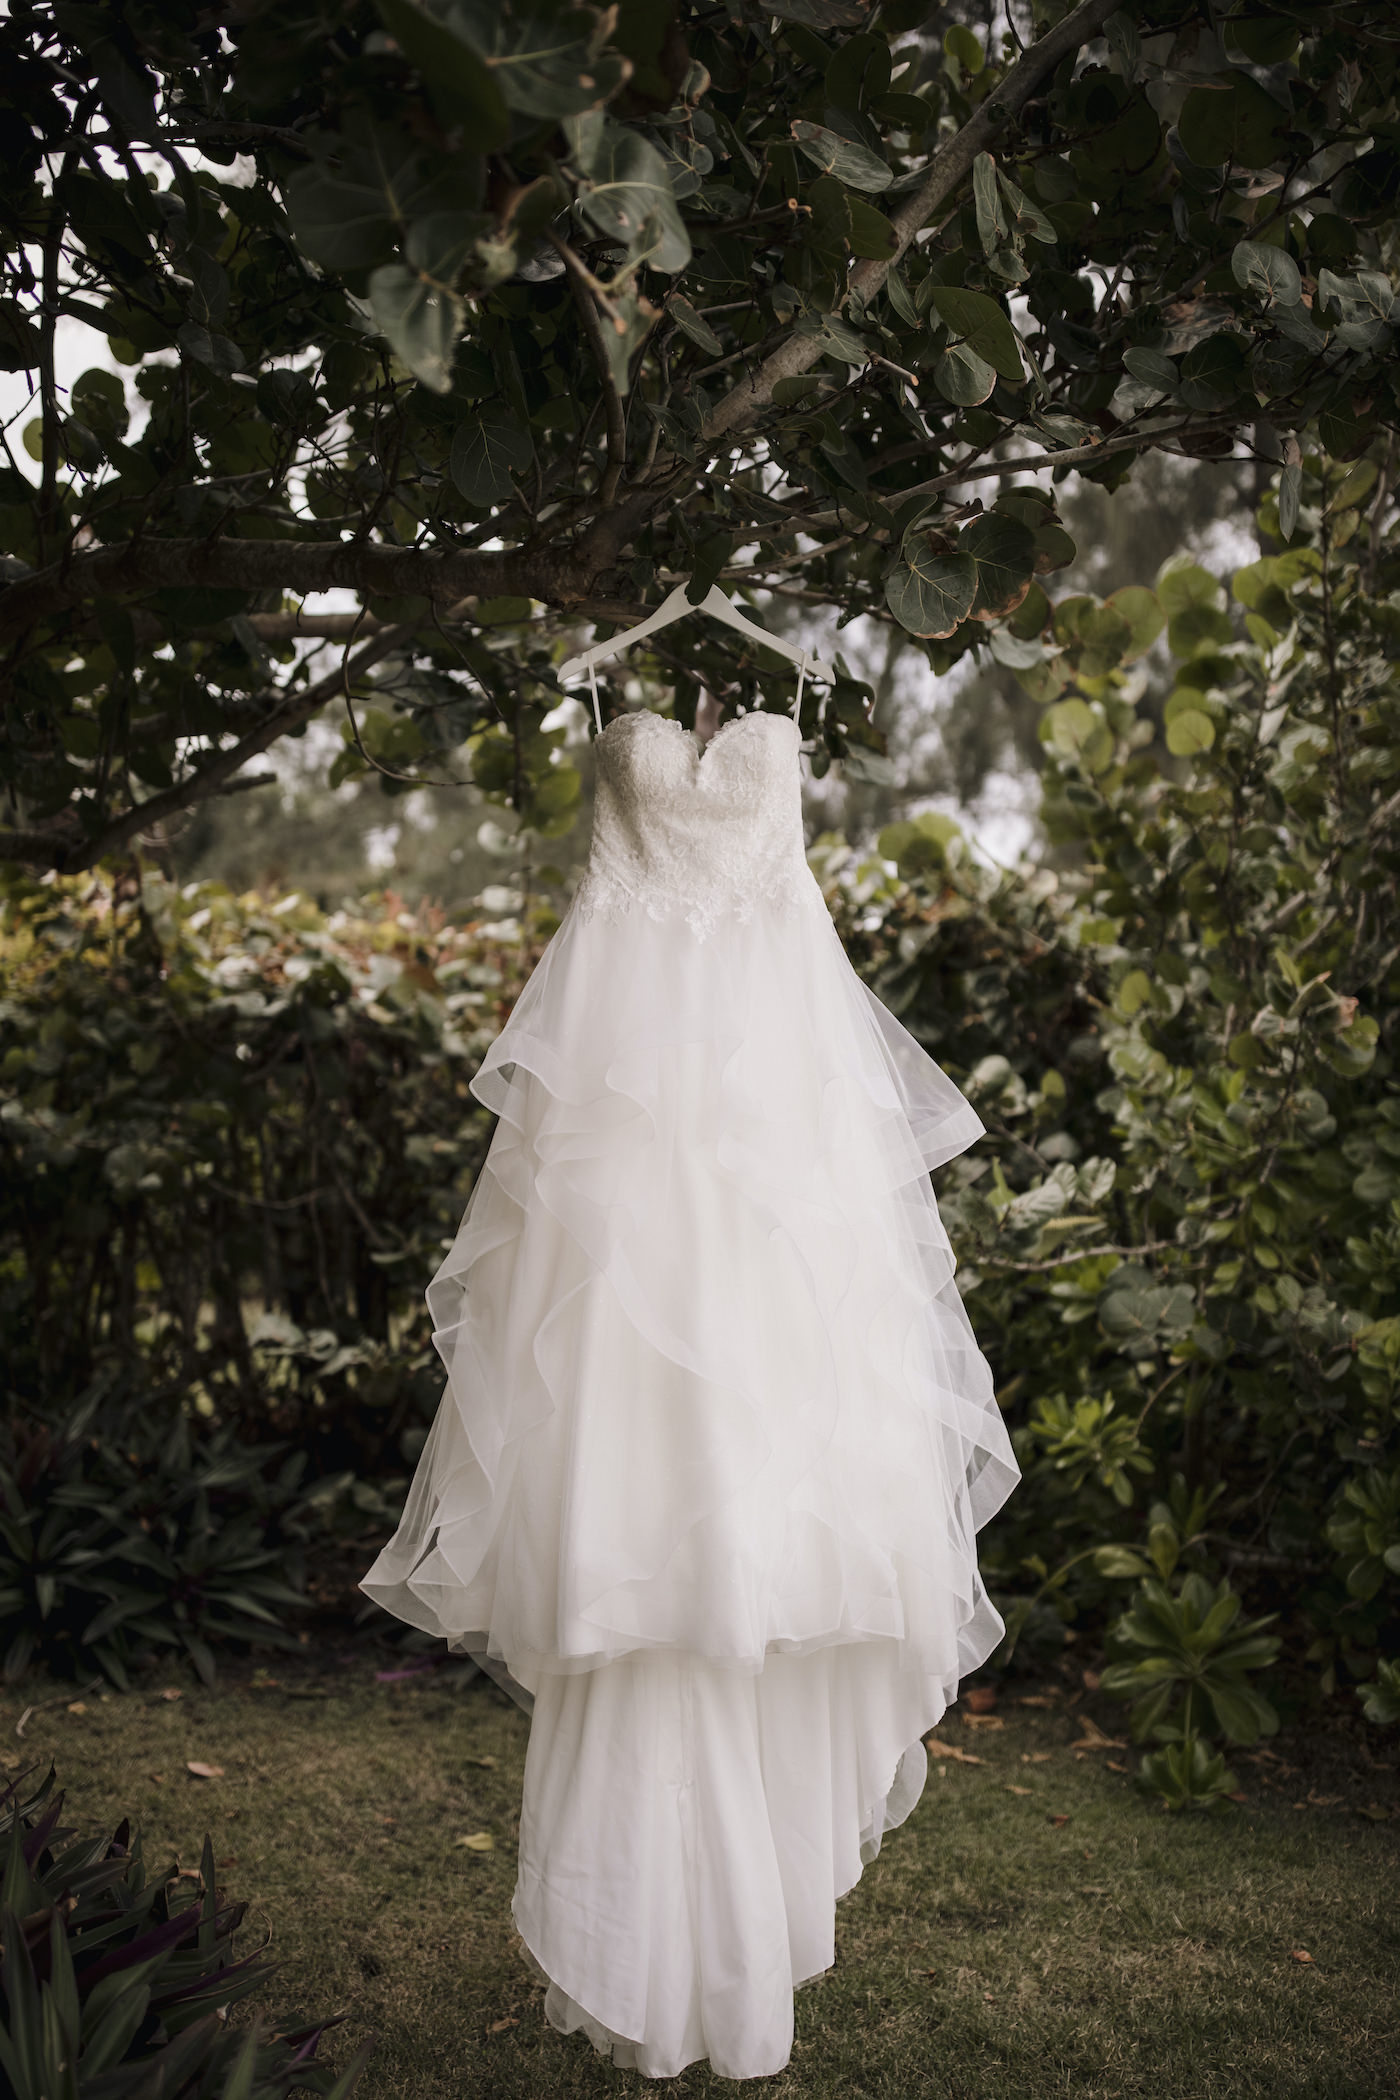 Outdoor Wedding Dress Hanger Shot | Horsehair Trim Tiered Organza Tulle Ballgown Bridal Gown with Sweetheart Neckline and Lace Bodice | Sarasota Wedding Dress Shop Truly Forever Bridal